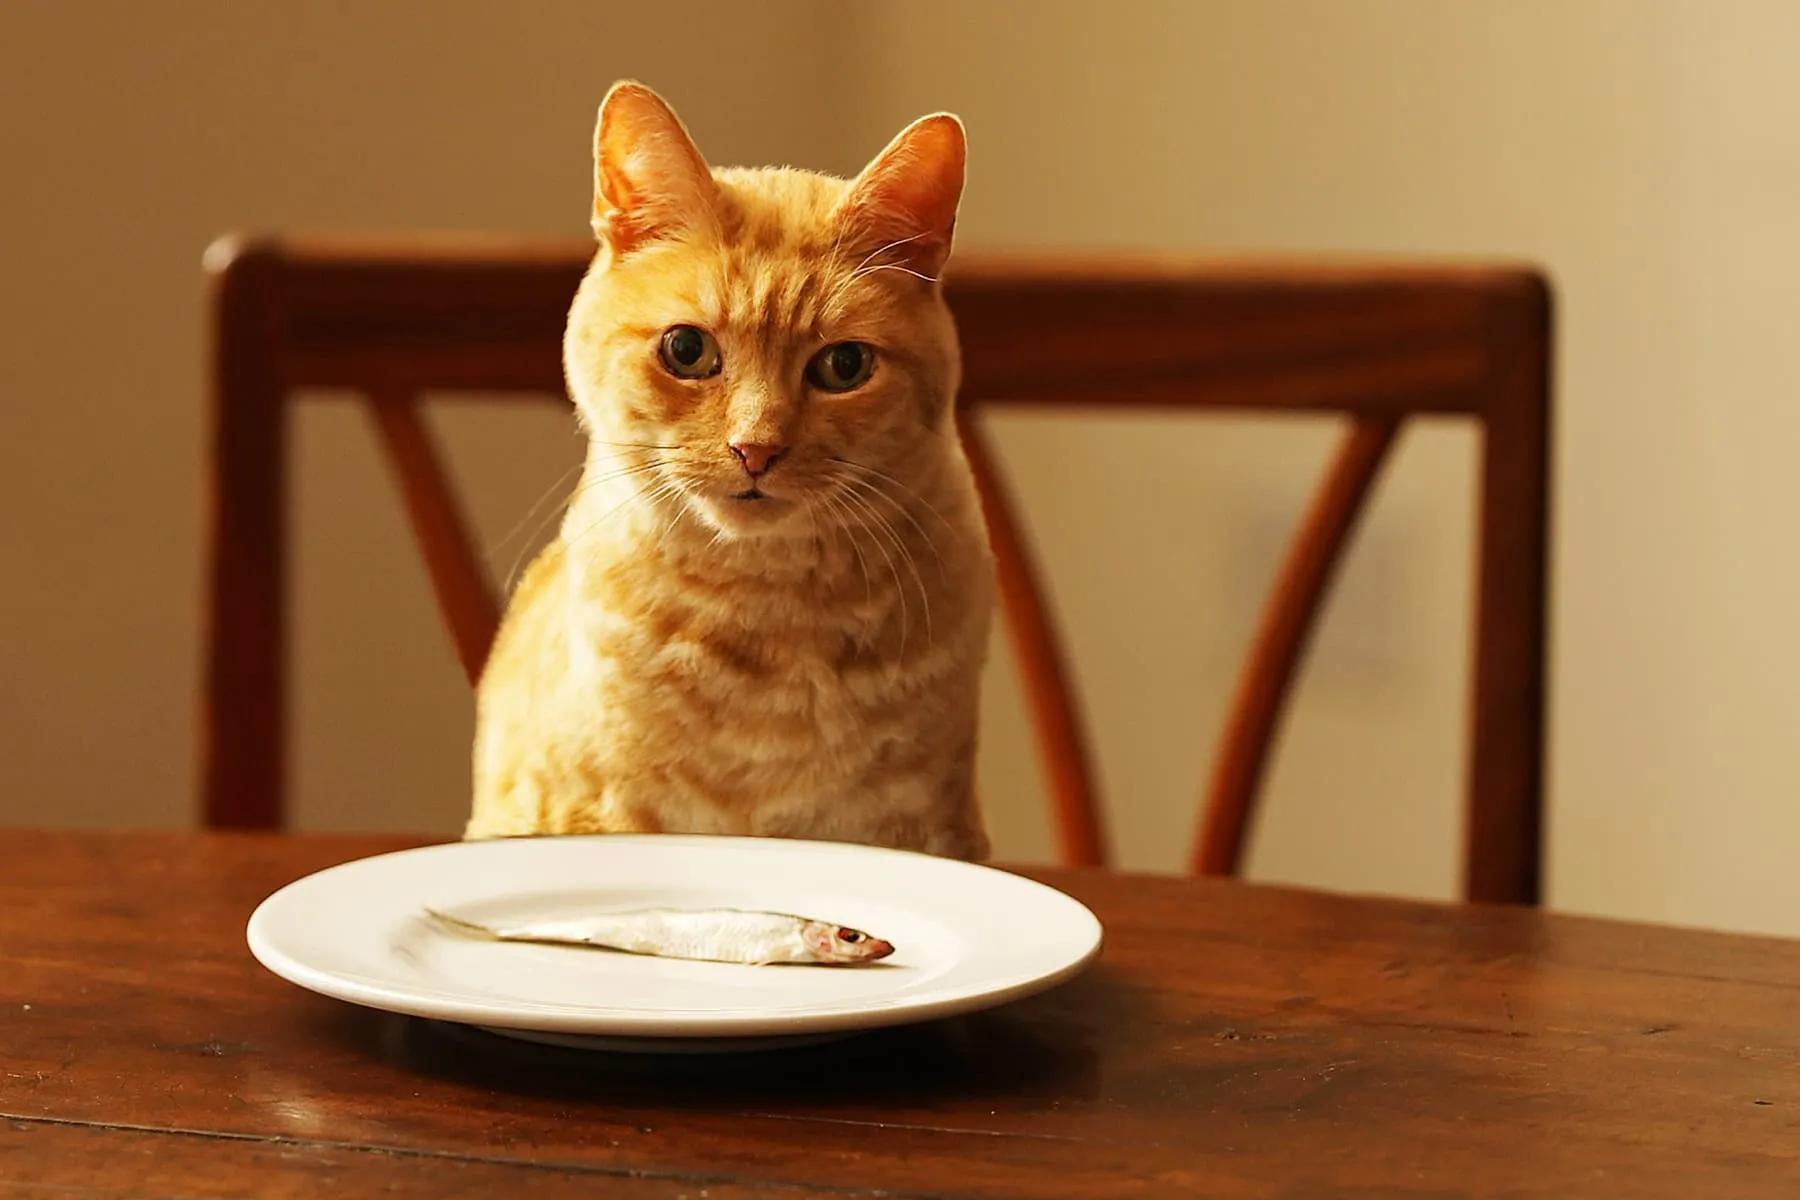 can cats eat smoked meat - What kind of meat is best for cats